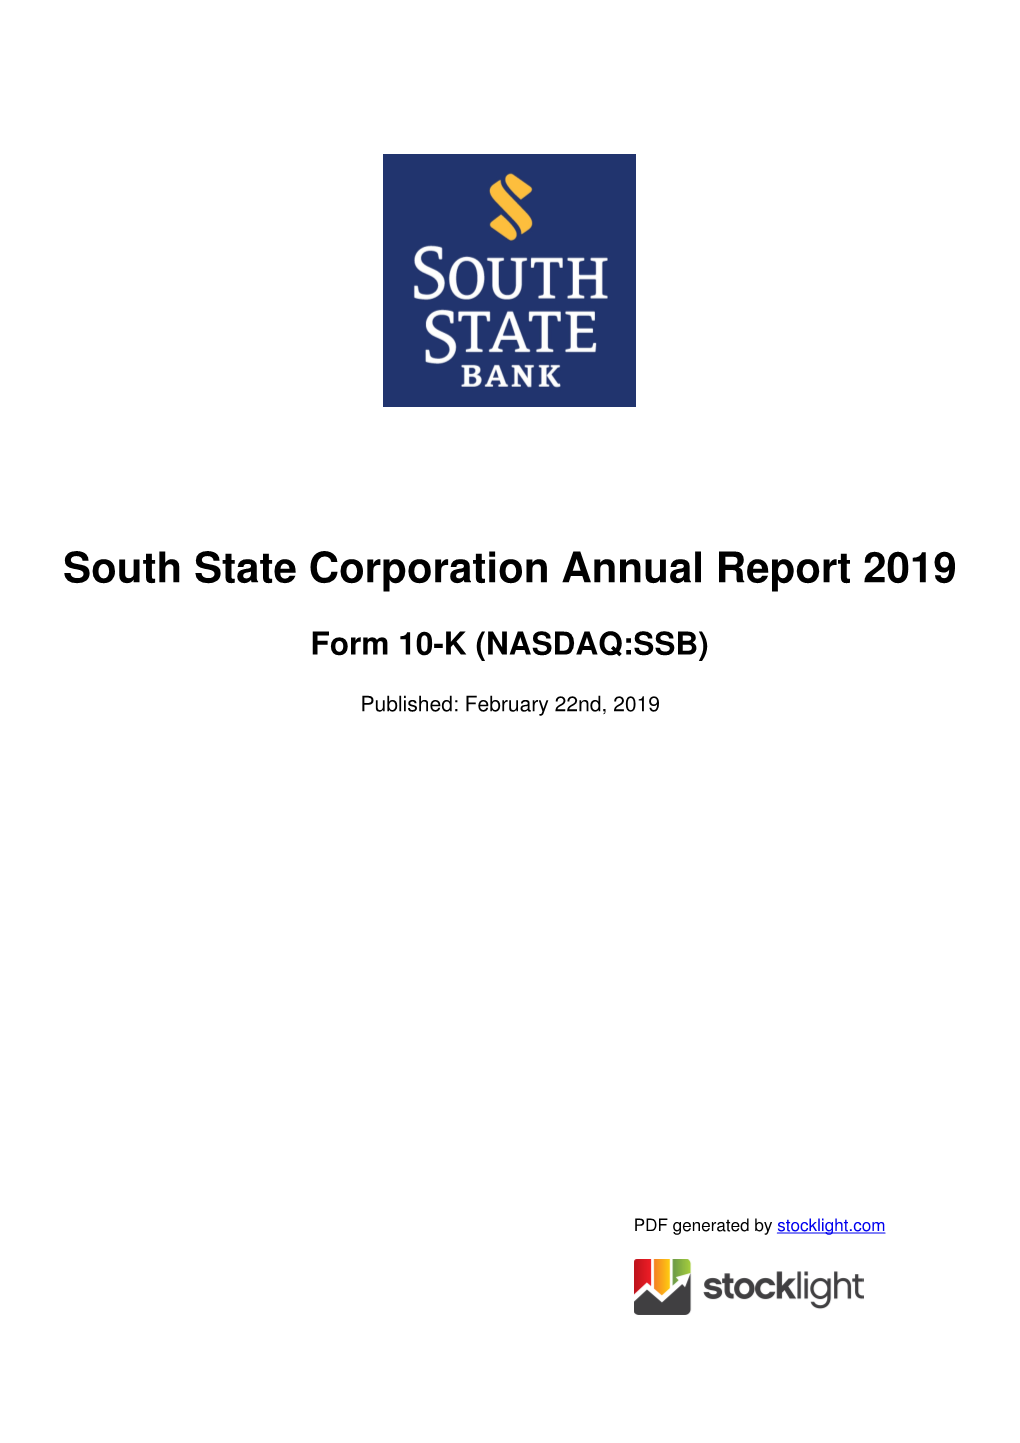 South State Corporation Annual Report 2019